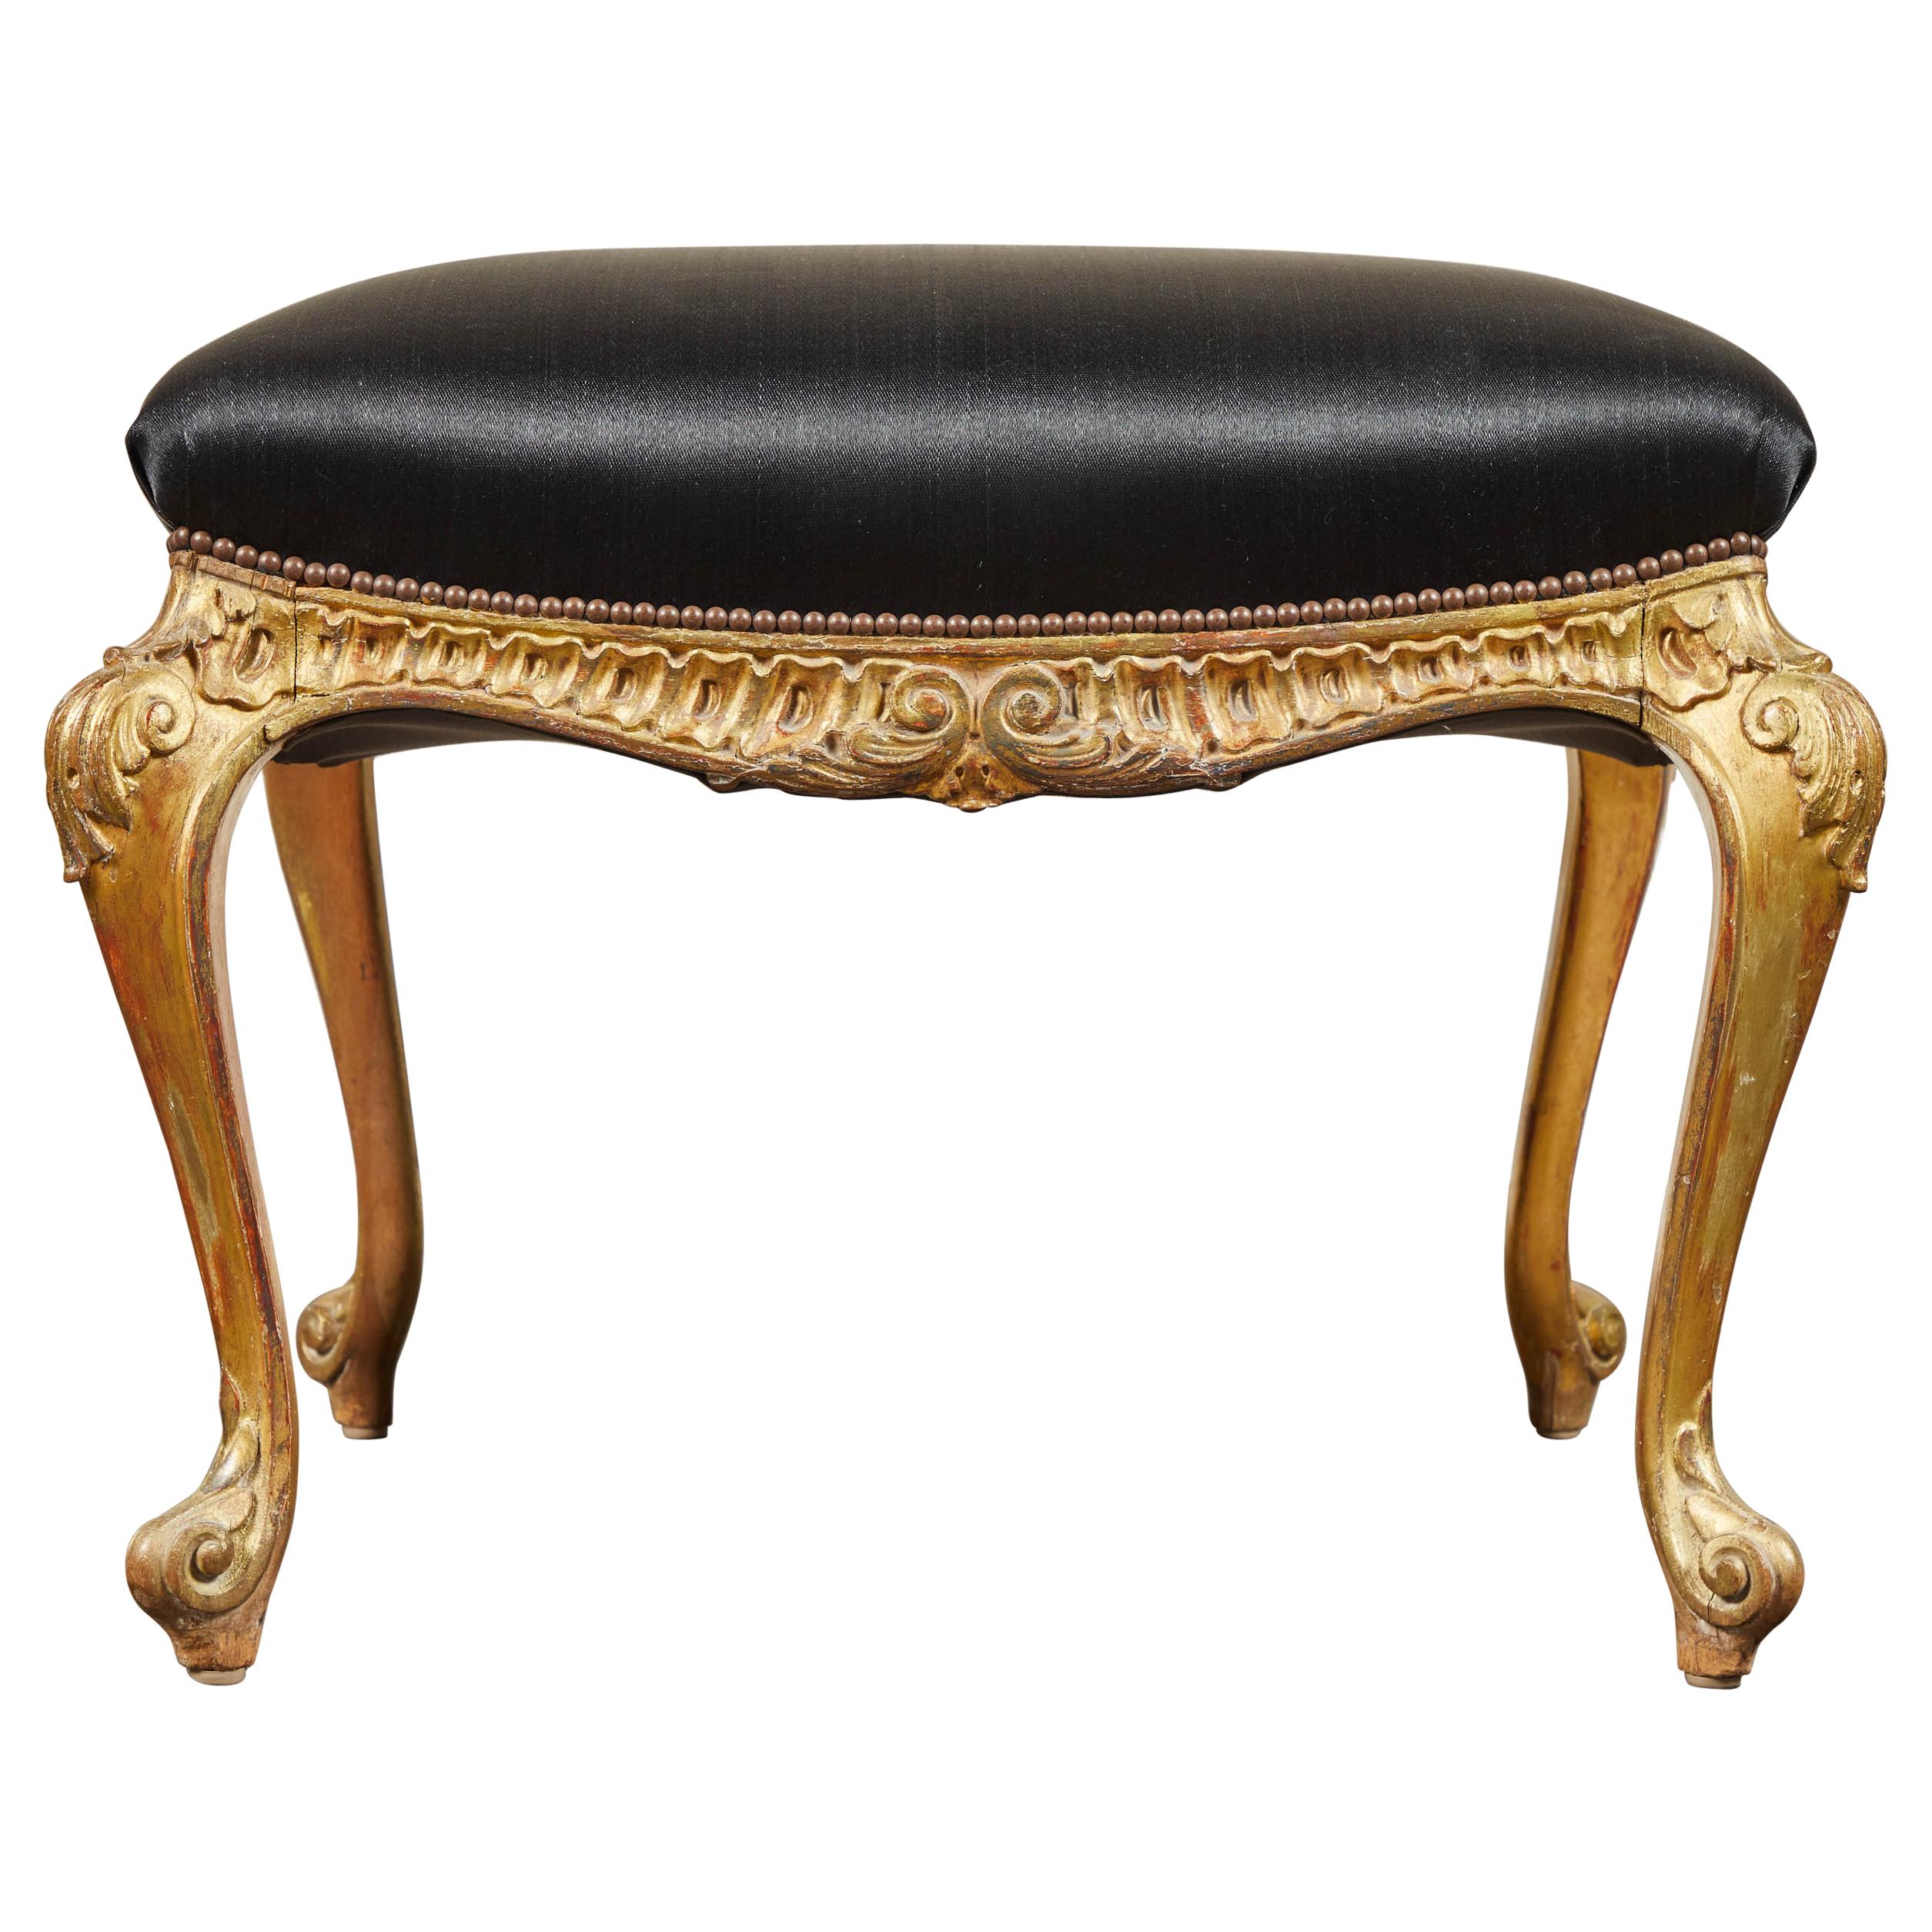 19th Century Italian Gilt and Paint Footstool with Horsehair